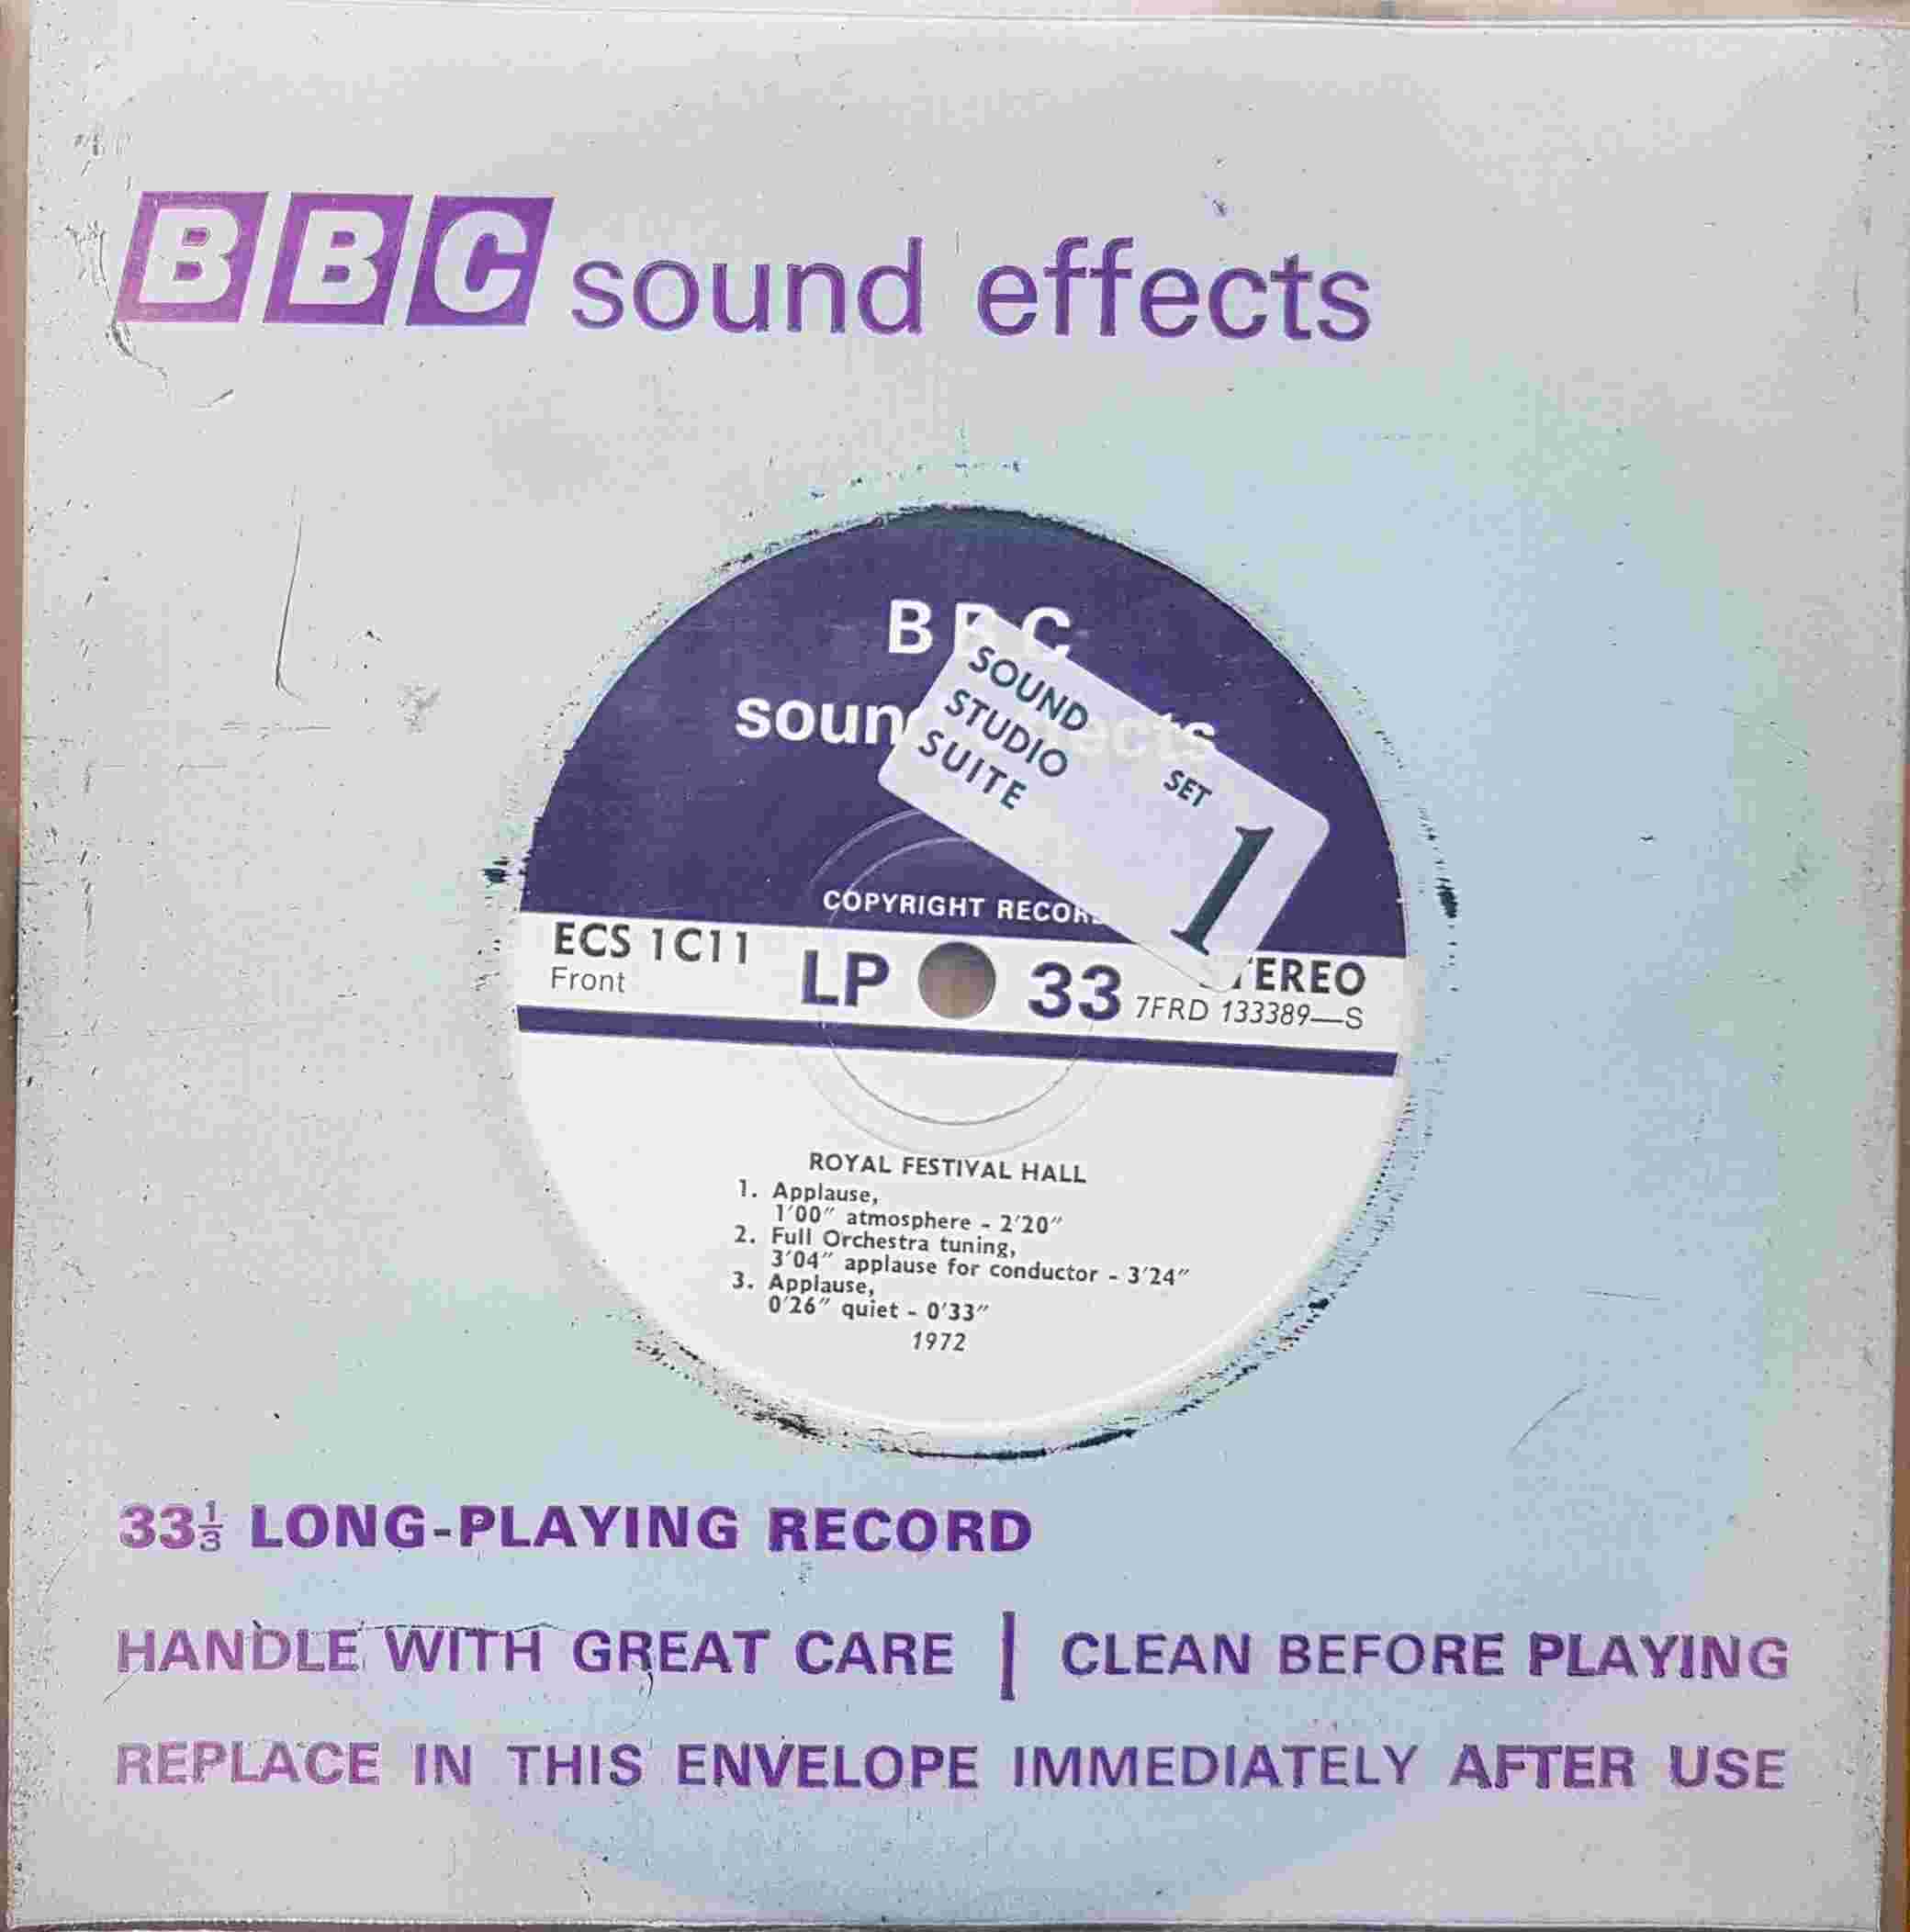 Picture of ECS 1C11 Royal Festival Hall by artist Not registered from the BBC singles - Records and Tapes library